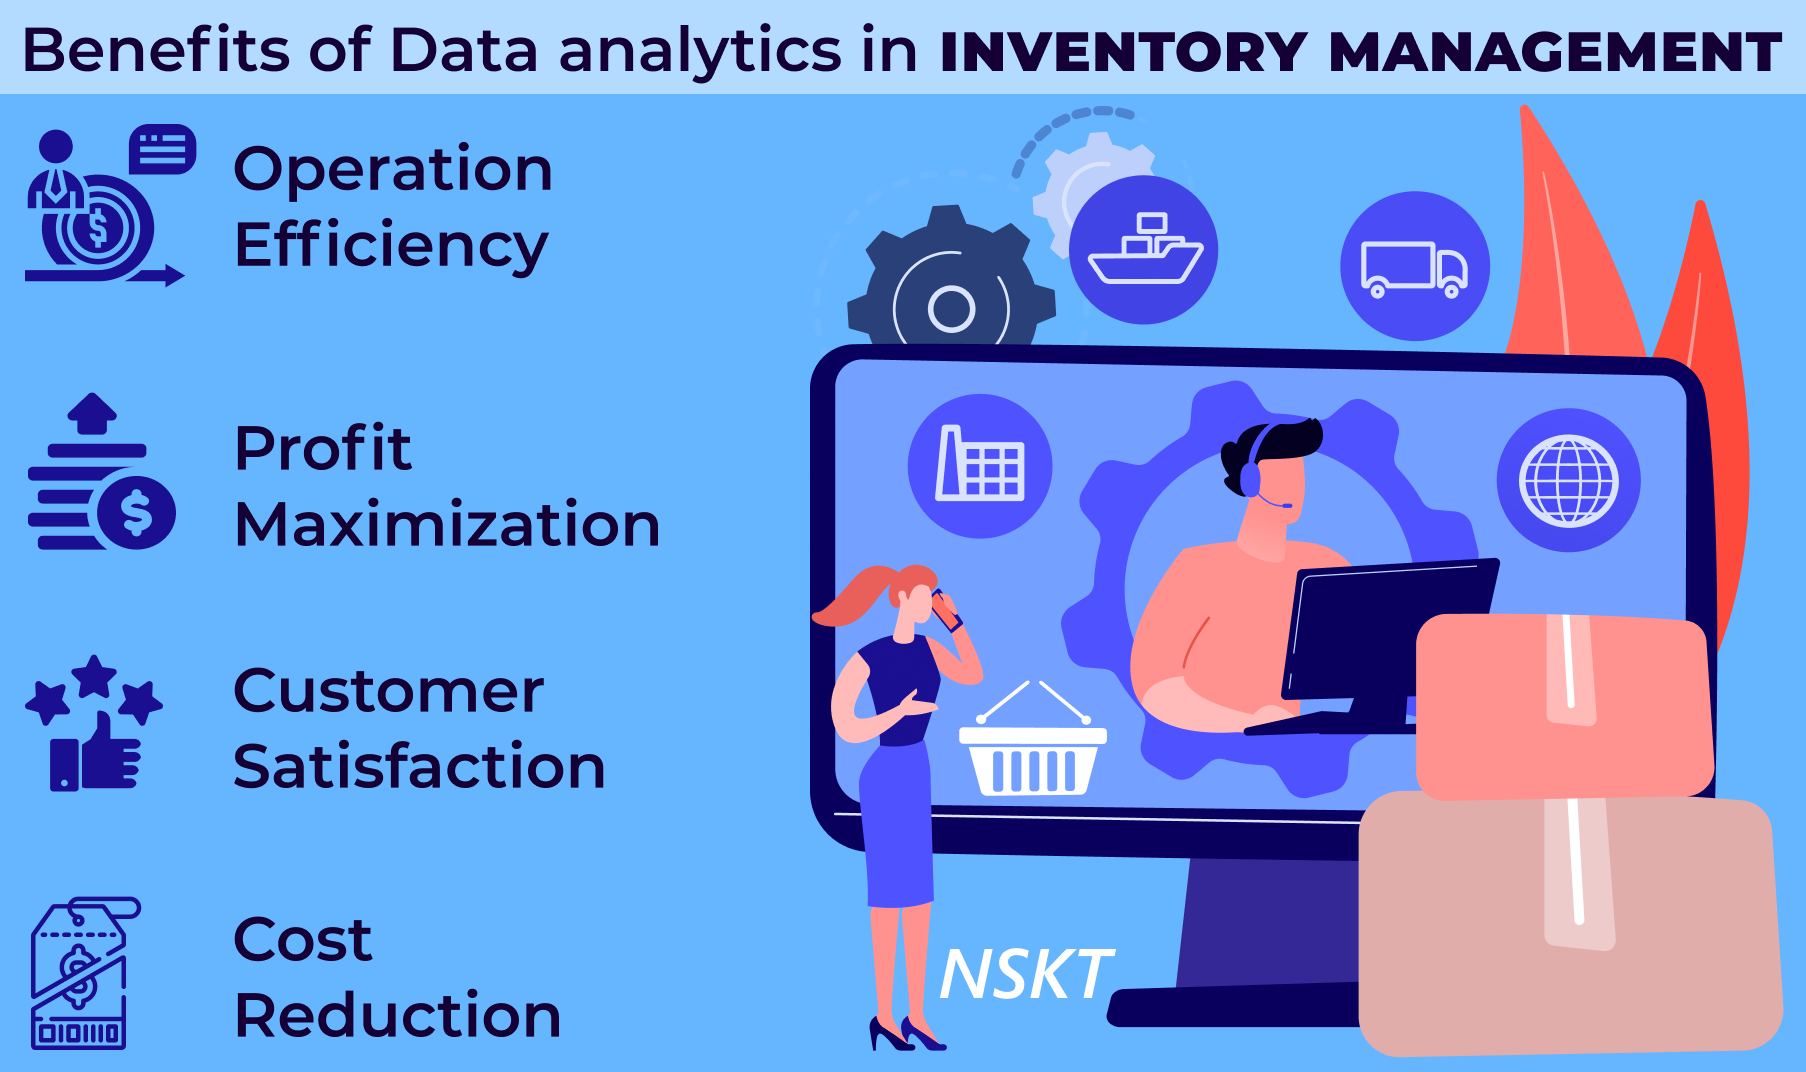 How data analytics can help in inventory management?